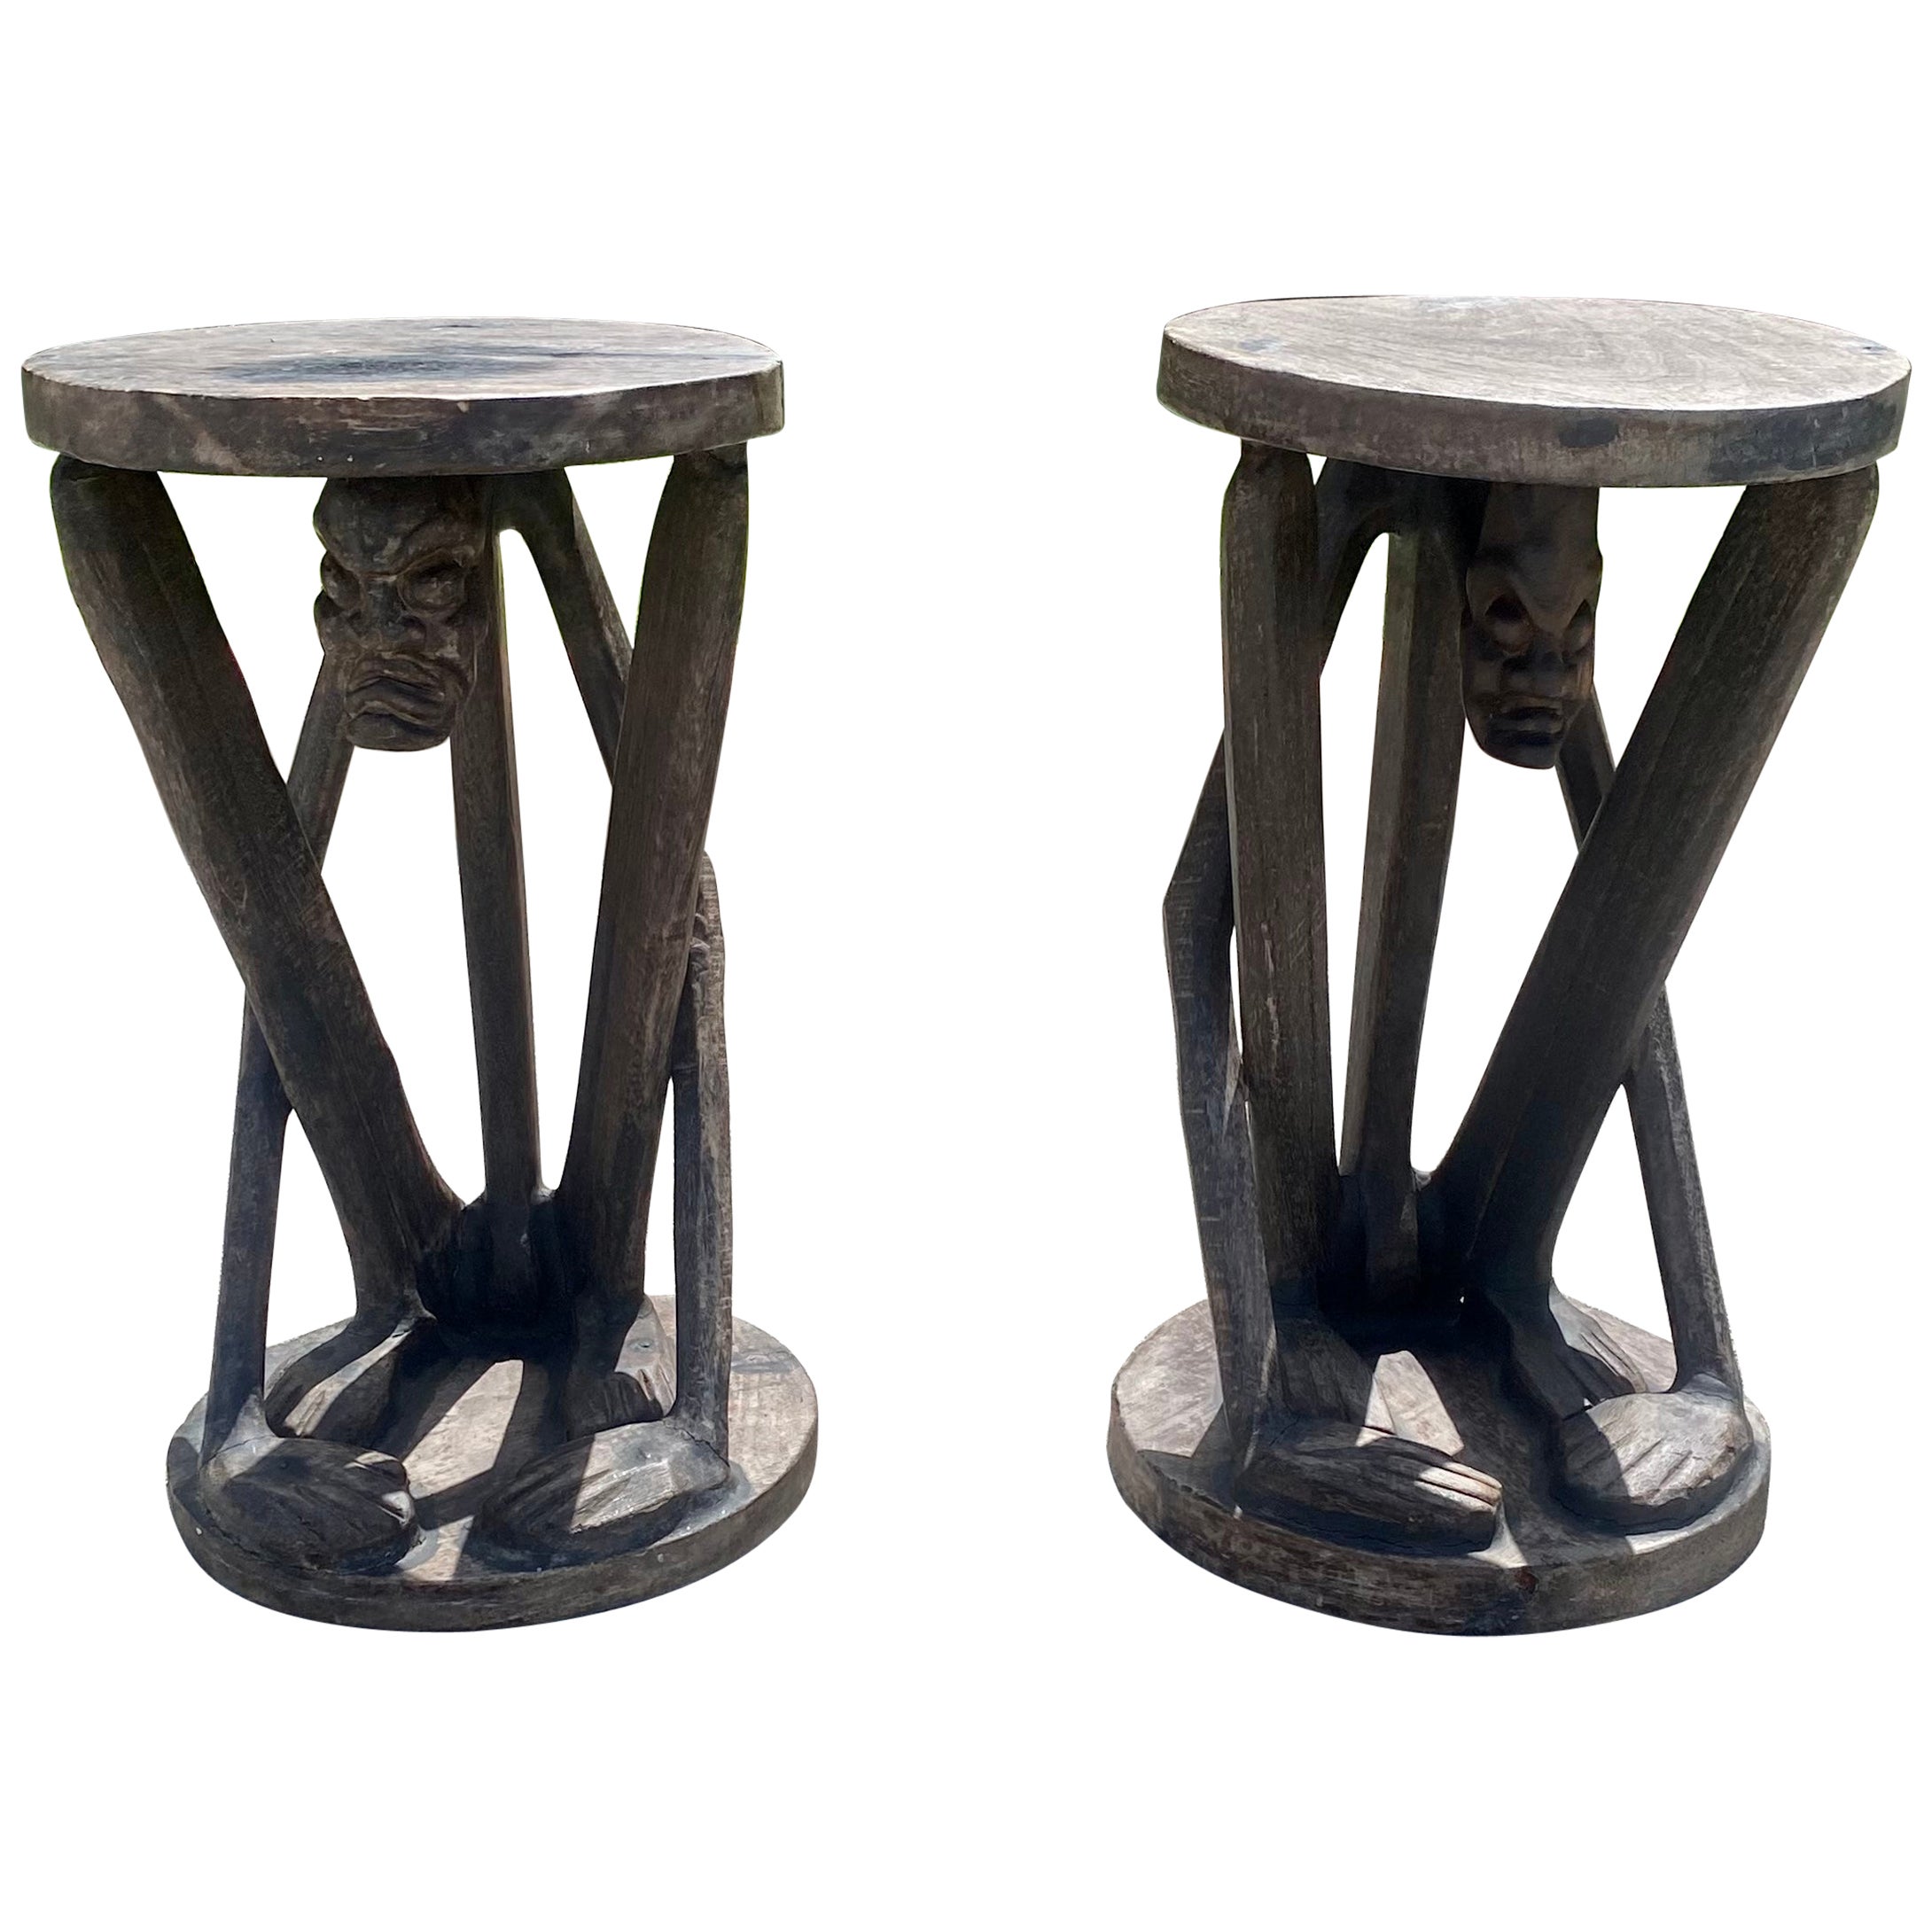 1930s African Figurative Folk Art Carved Wood Stools Table, Set of 2 For Sale